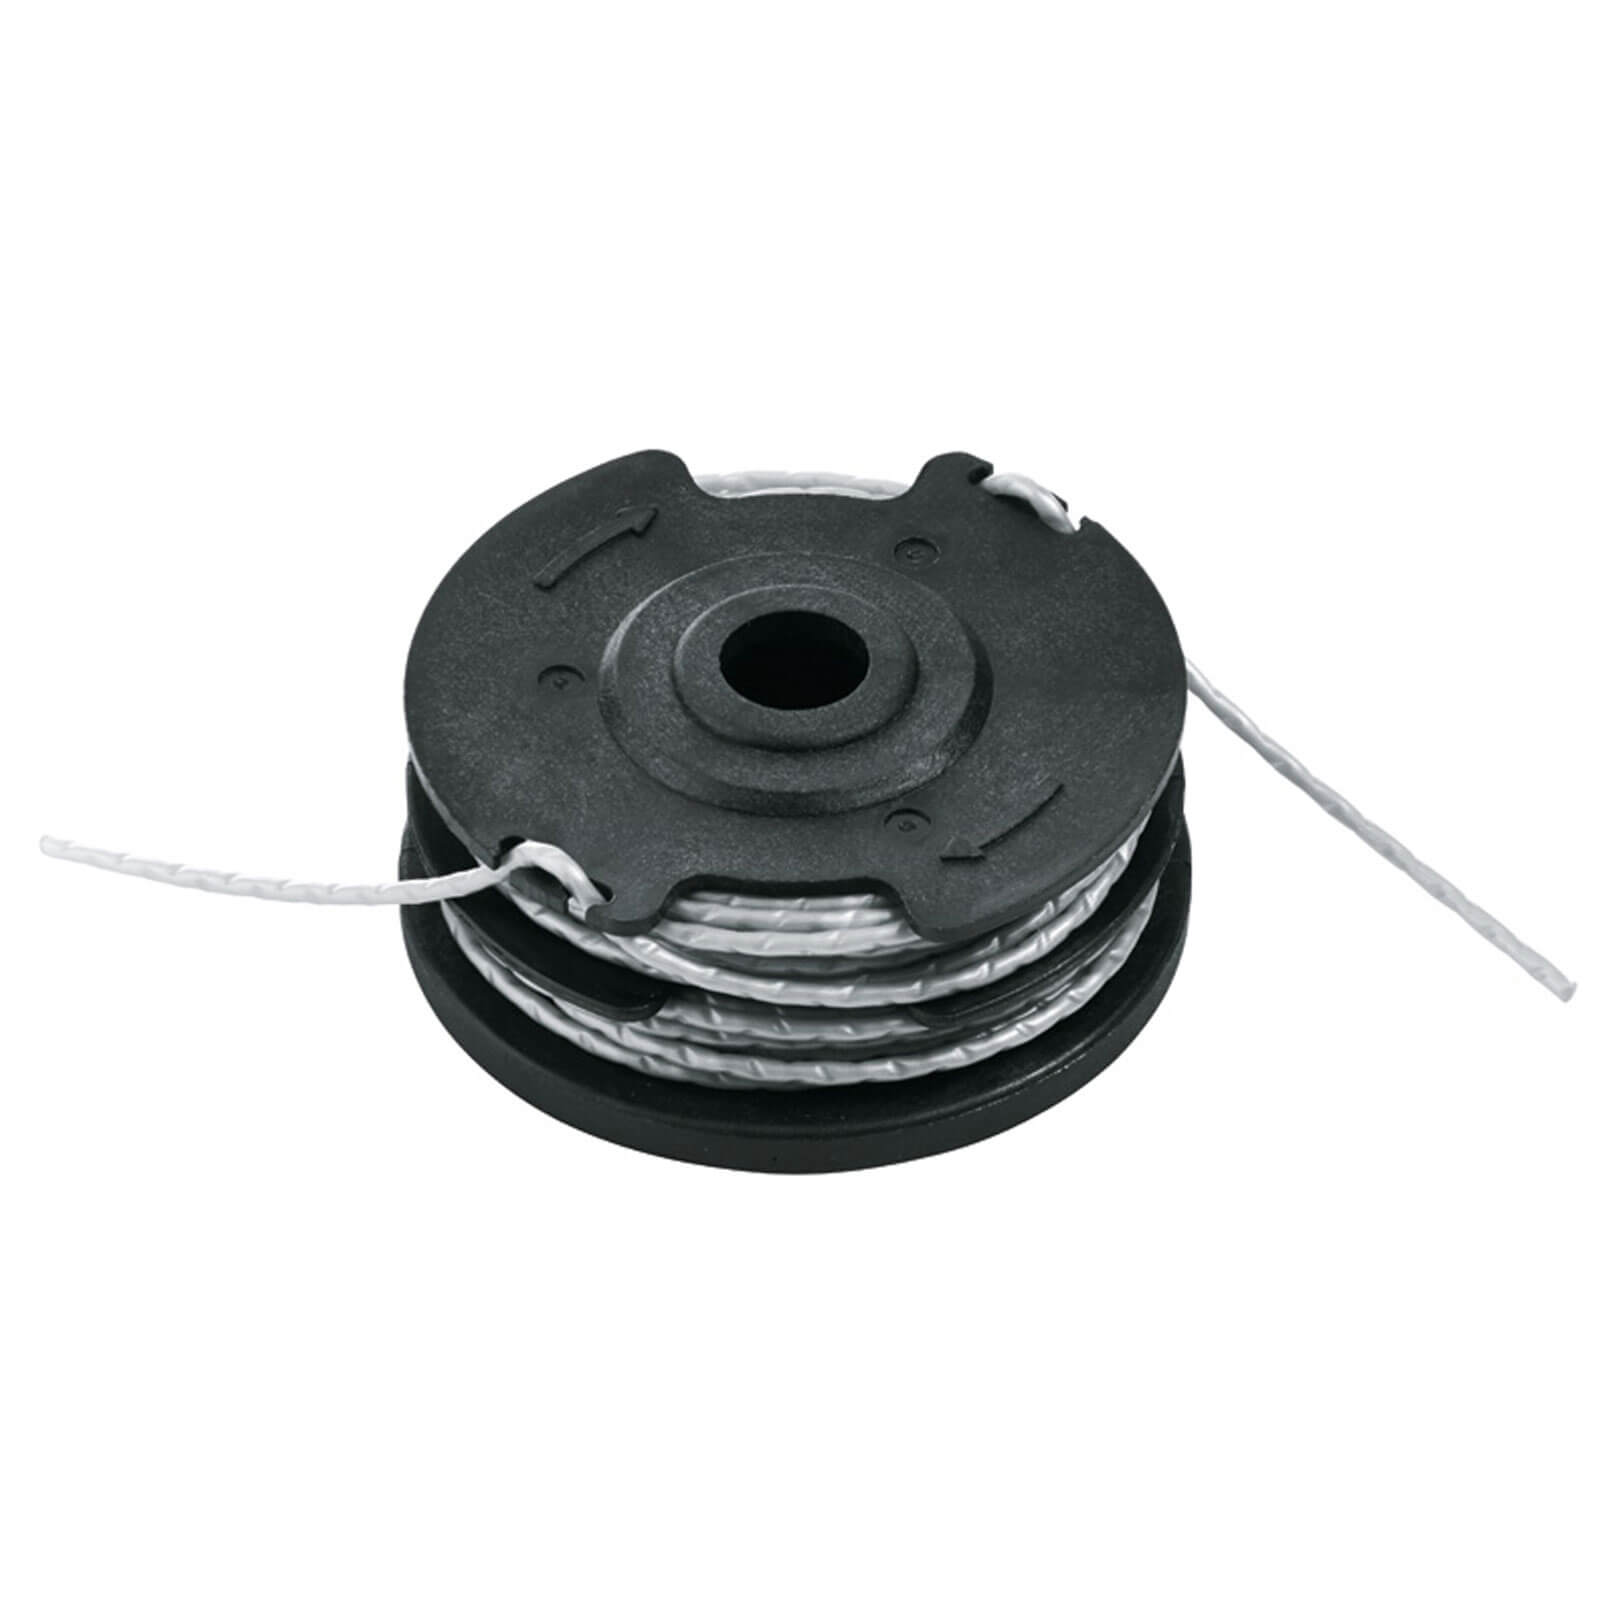 Photos - Lawn Mower Bosch Genuine Spool and Line for ART 35 Grass Trimmers Pack of 1 